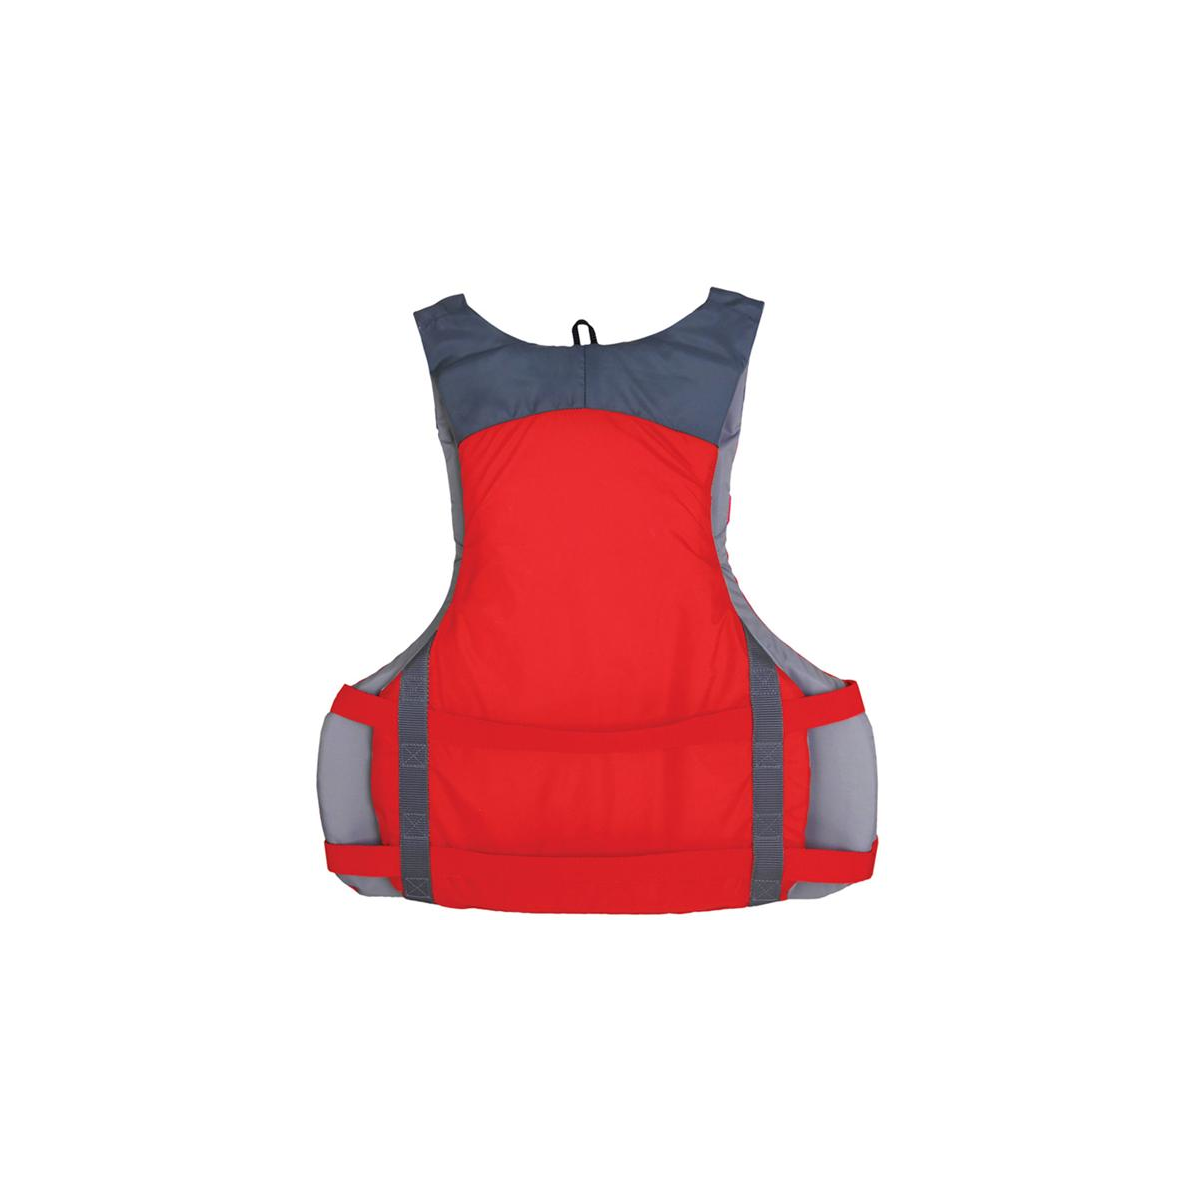 Adult Stohlquist Fit Life Jacket/Personal Floatation Device